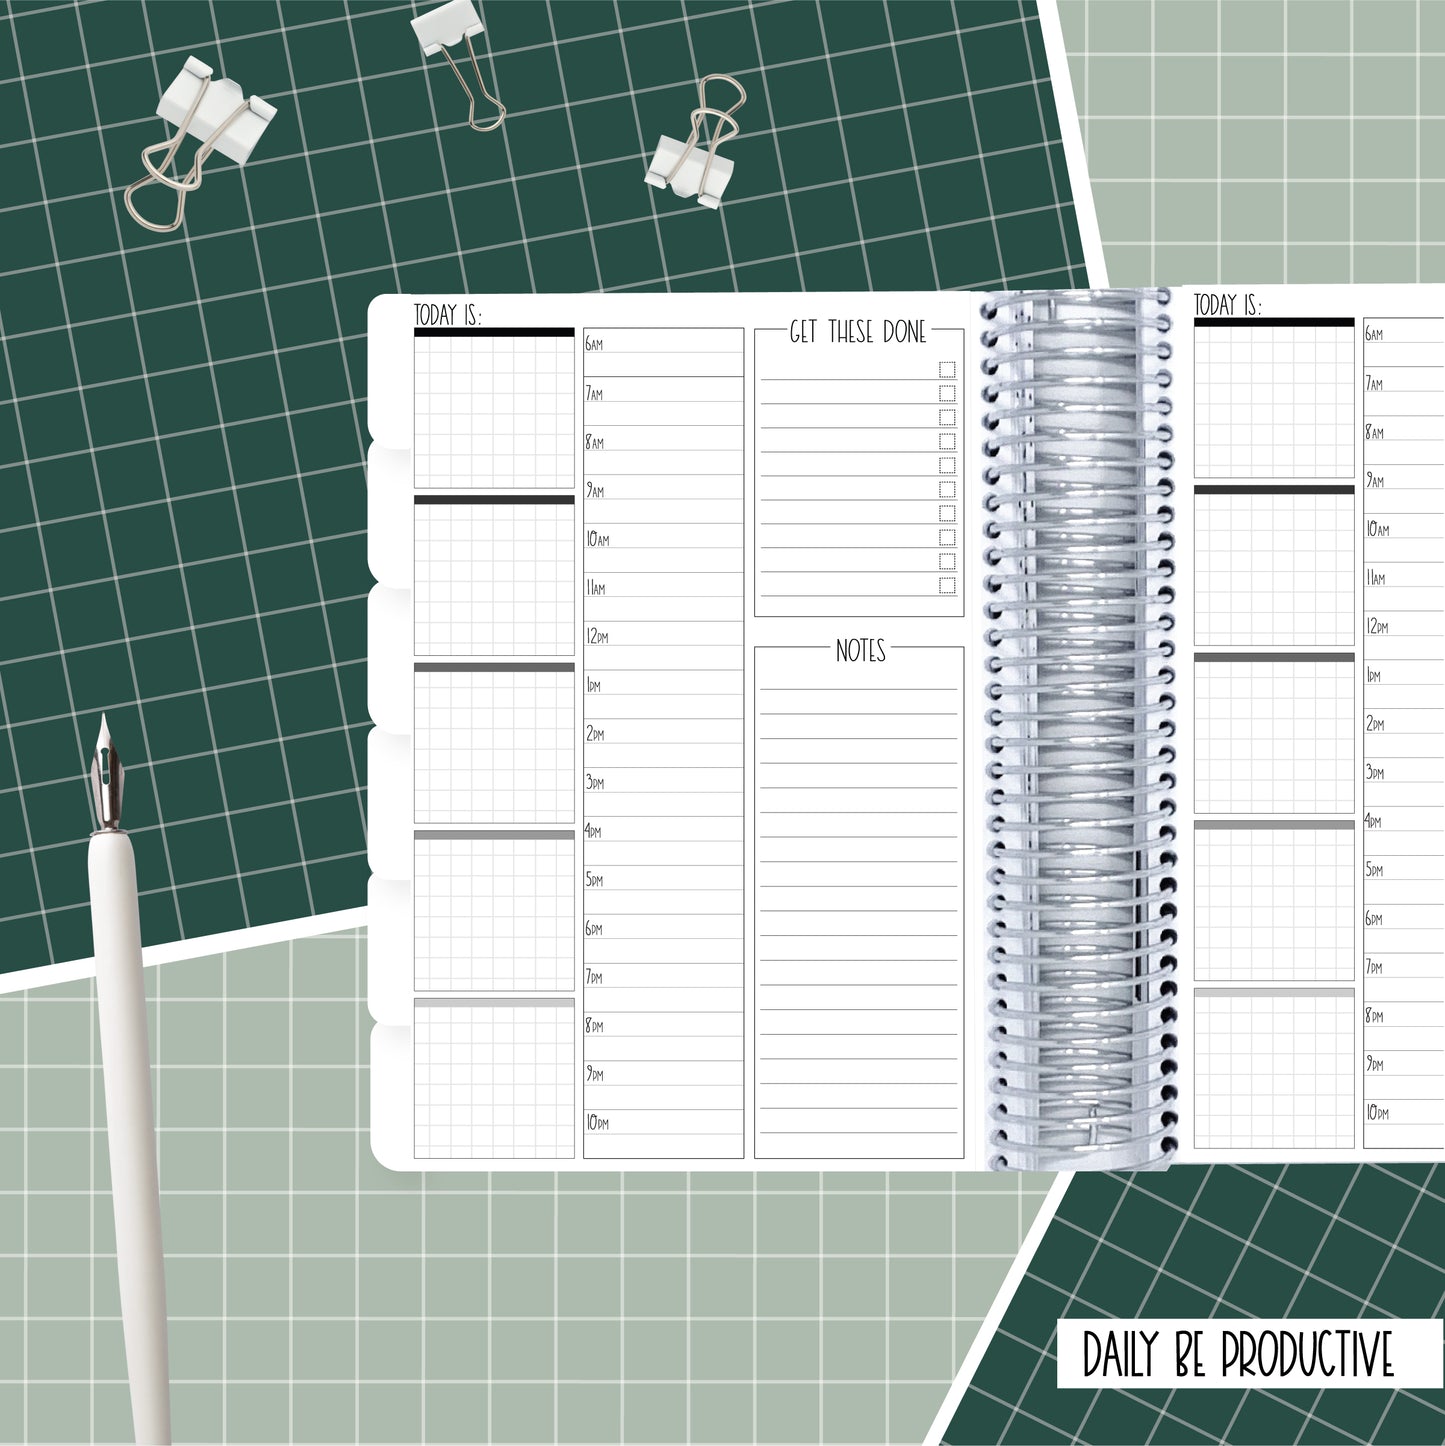 Leopard Swirls - A5 Daily Be Productive Planner